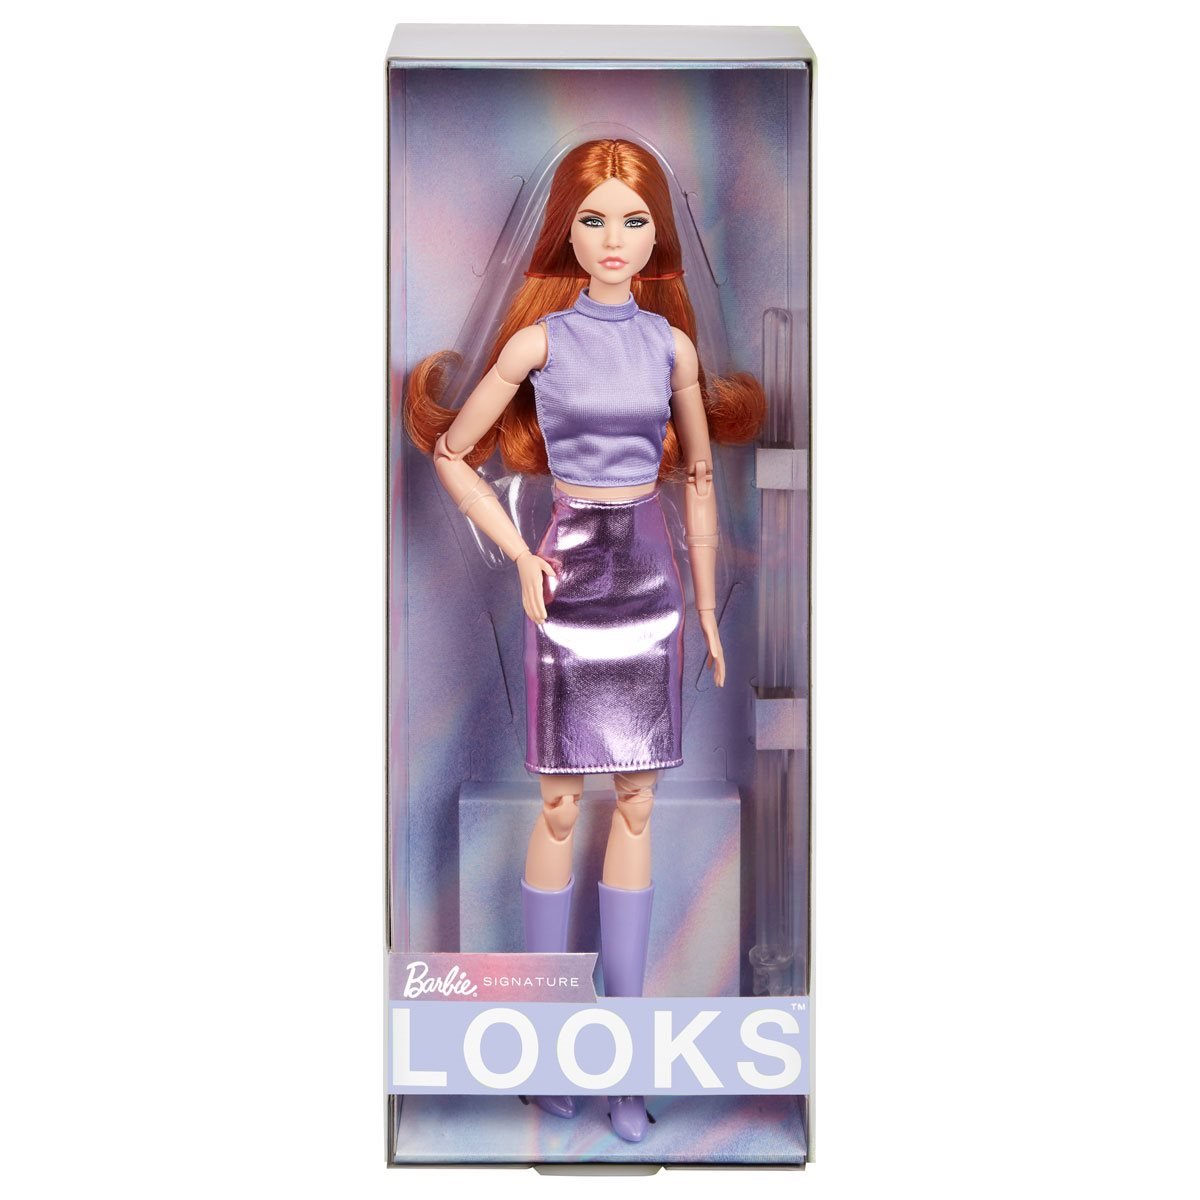 Barbie Signature Barbie Looks Doll #20 (Original, Long Red Hair) - Simon's Collectibles